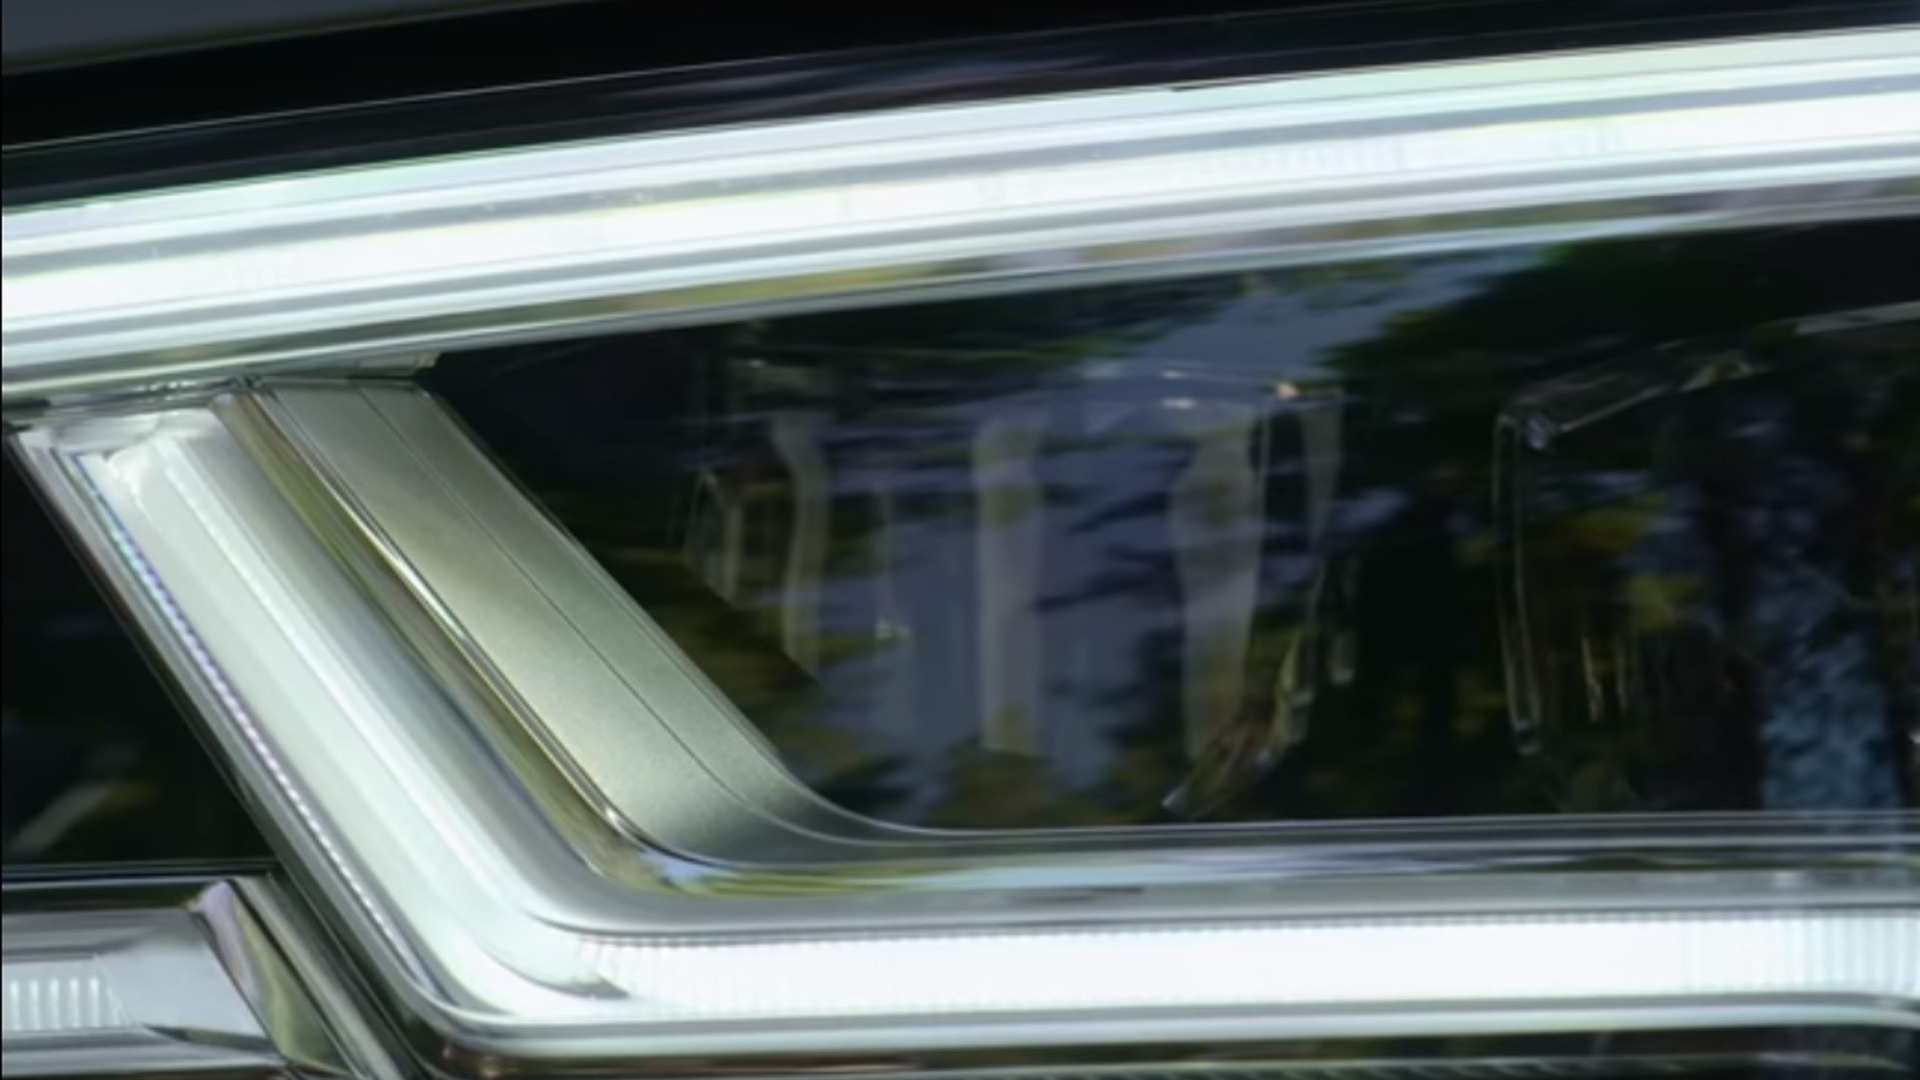 Teaser for new Audi Q5 debuting at 2016 Paris auto show